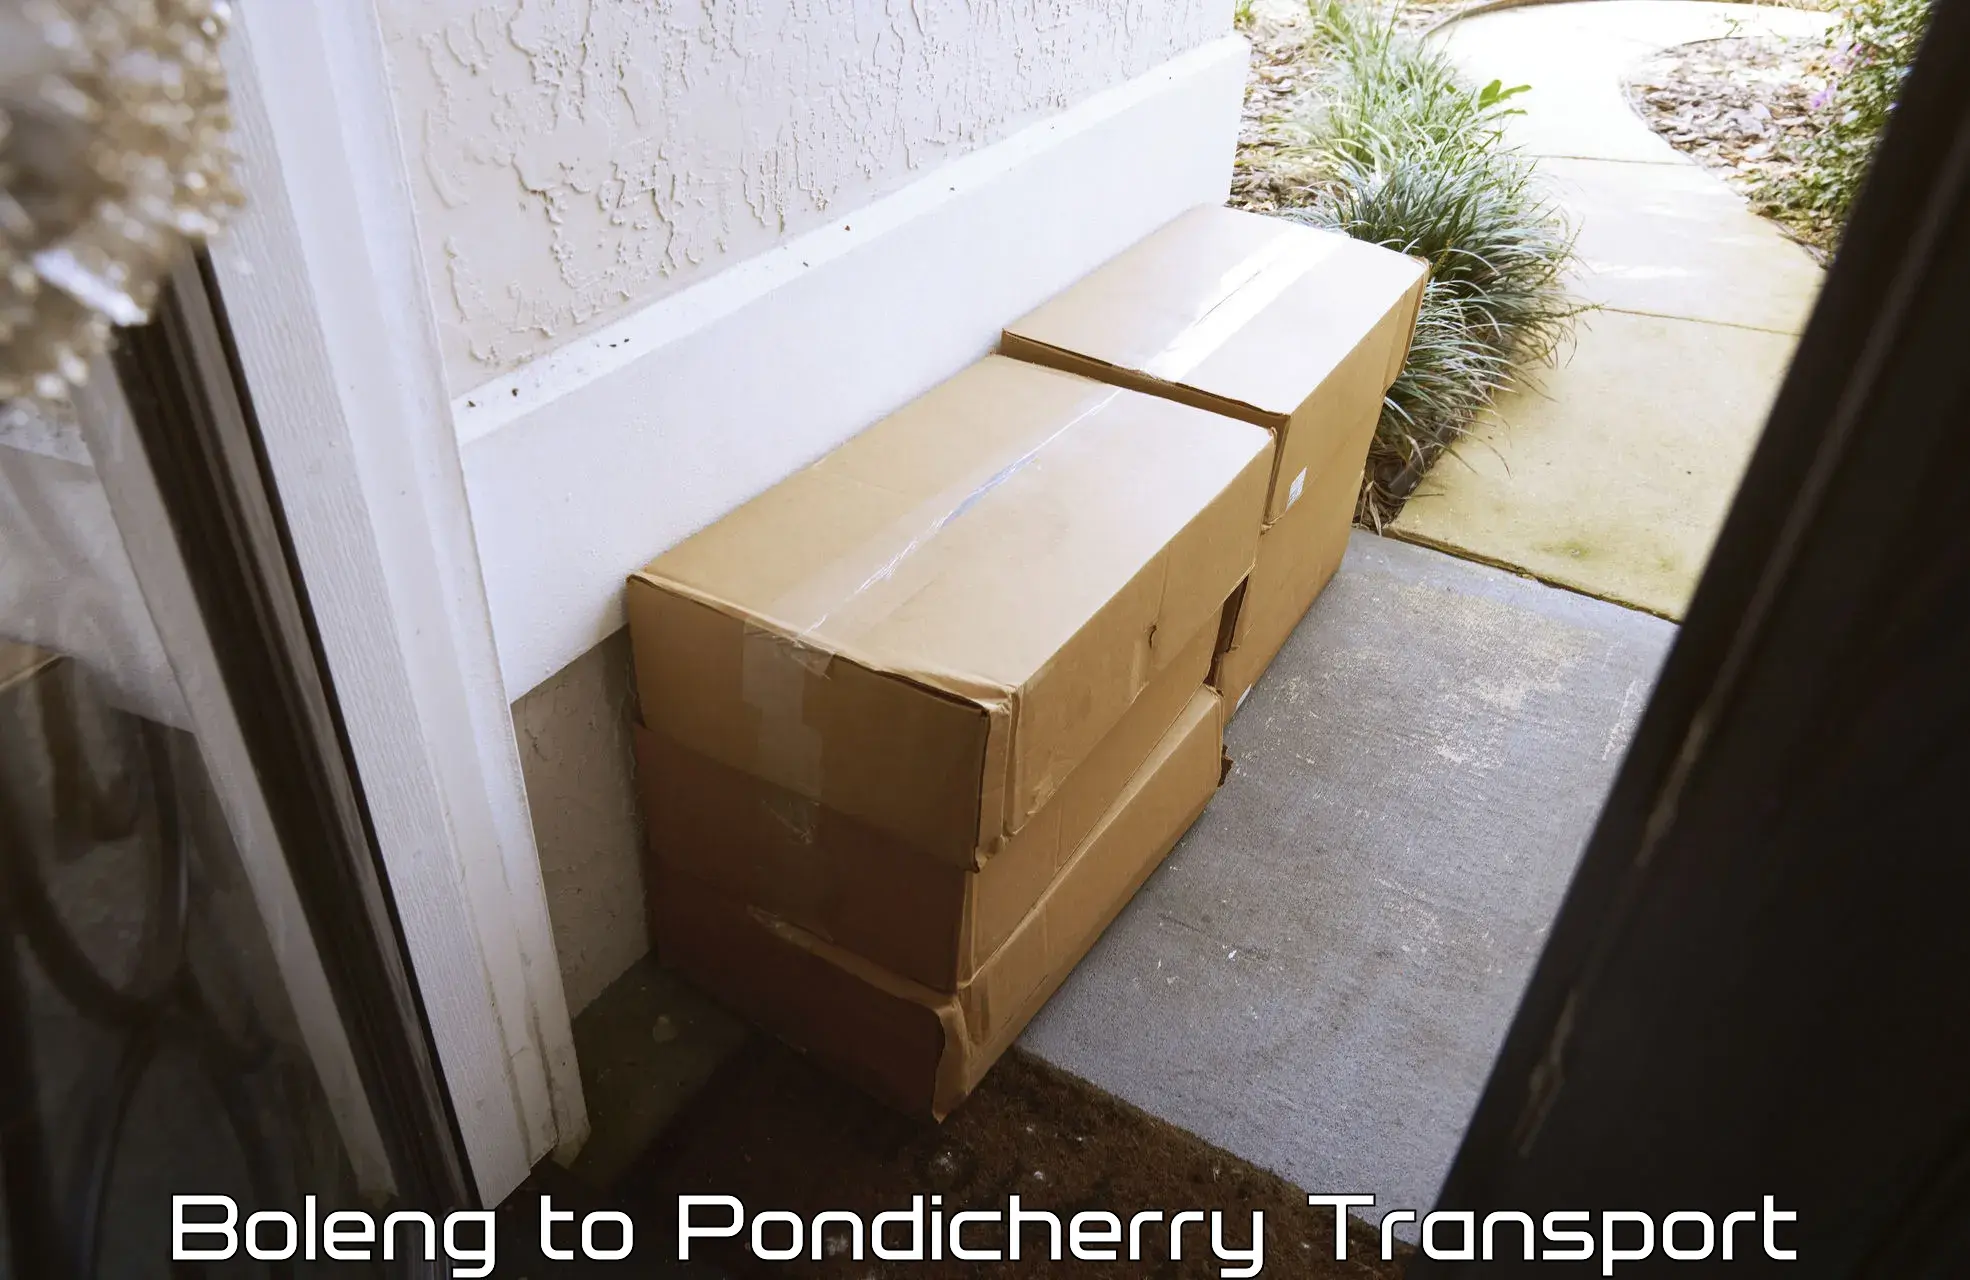 Goods delivery service Boleng to Pondicherry